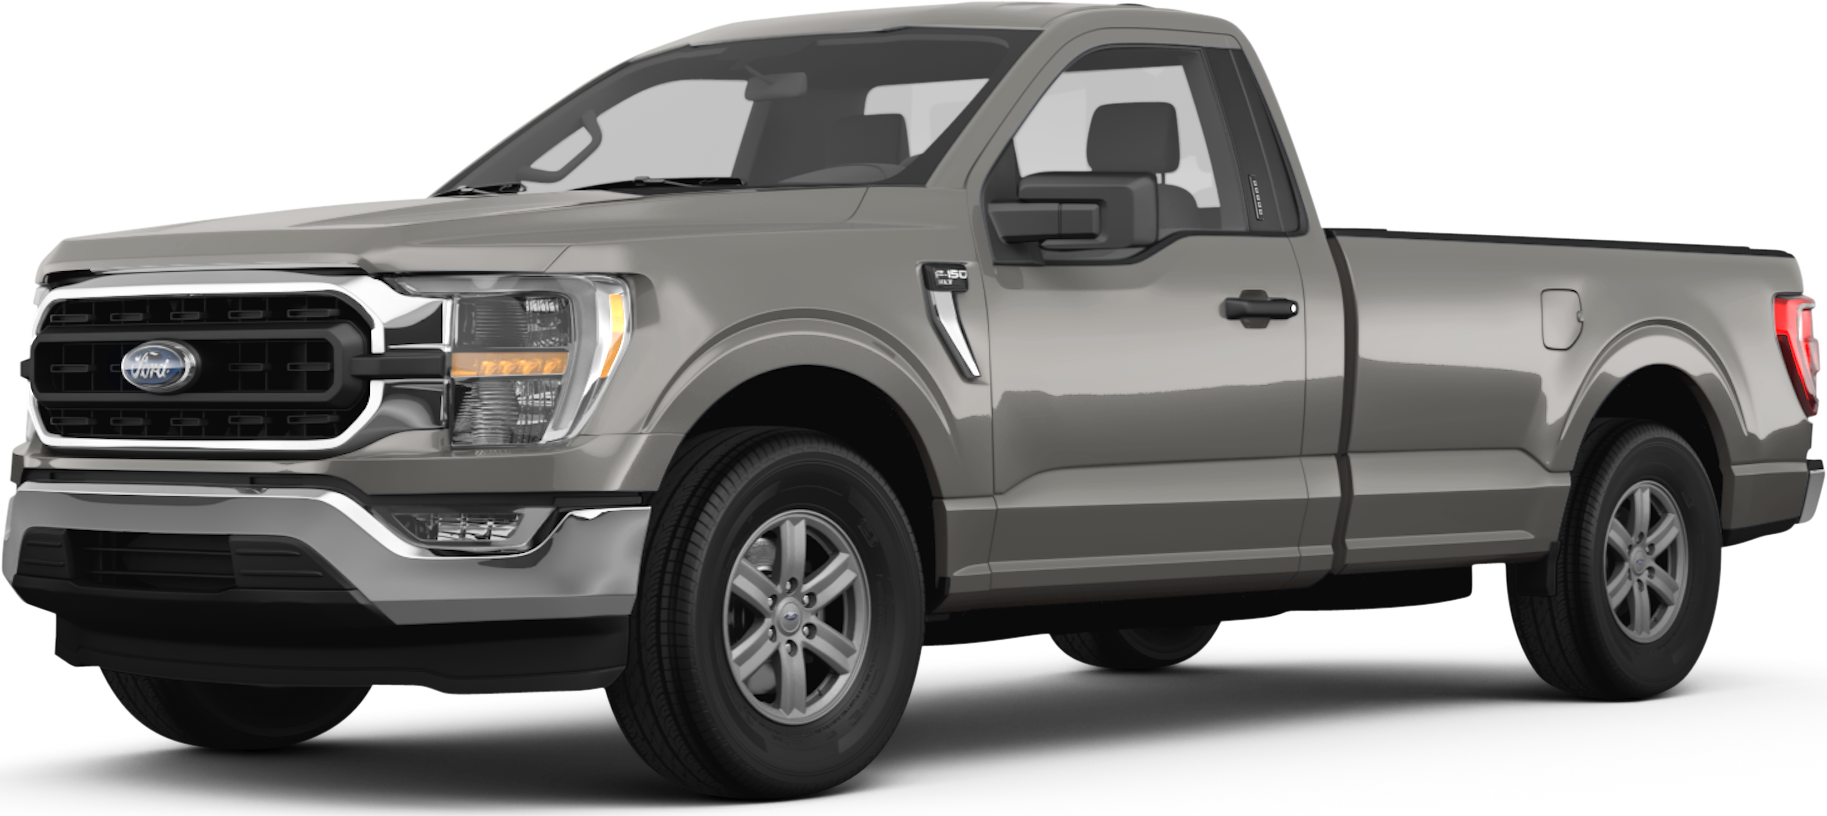 2023 Ford F150 Regular Cab Price, Reviews, Pictures & More